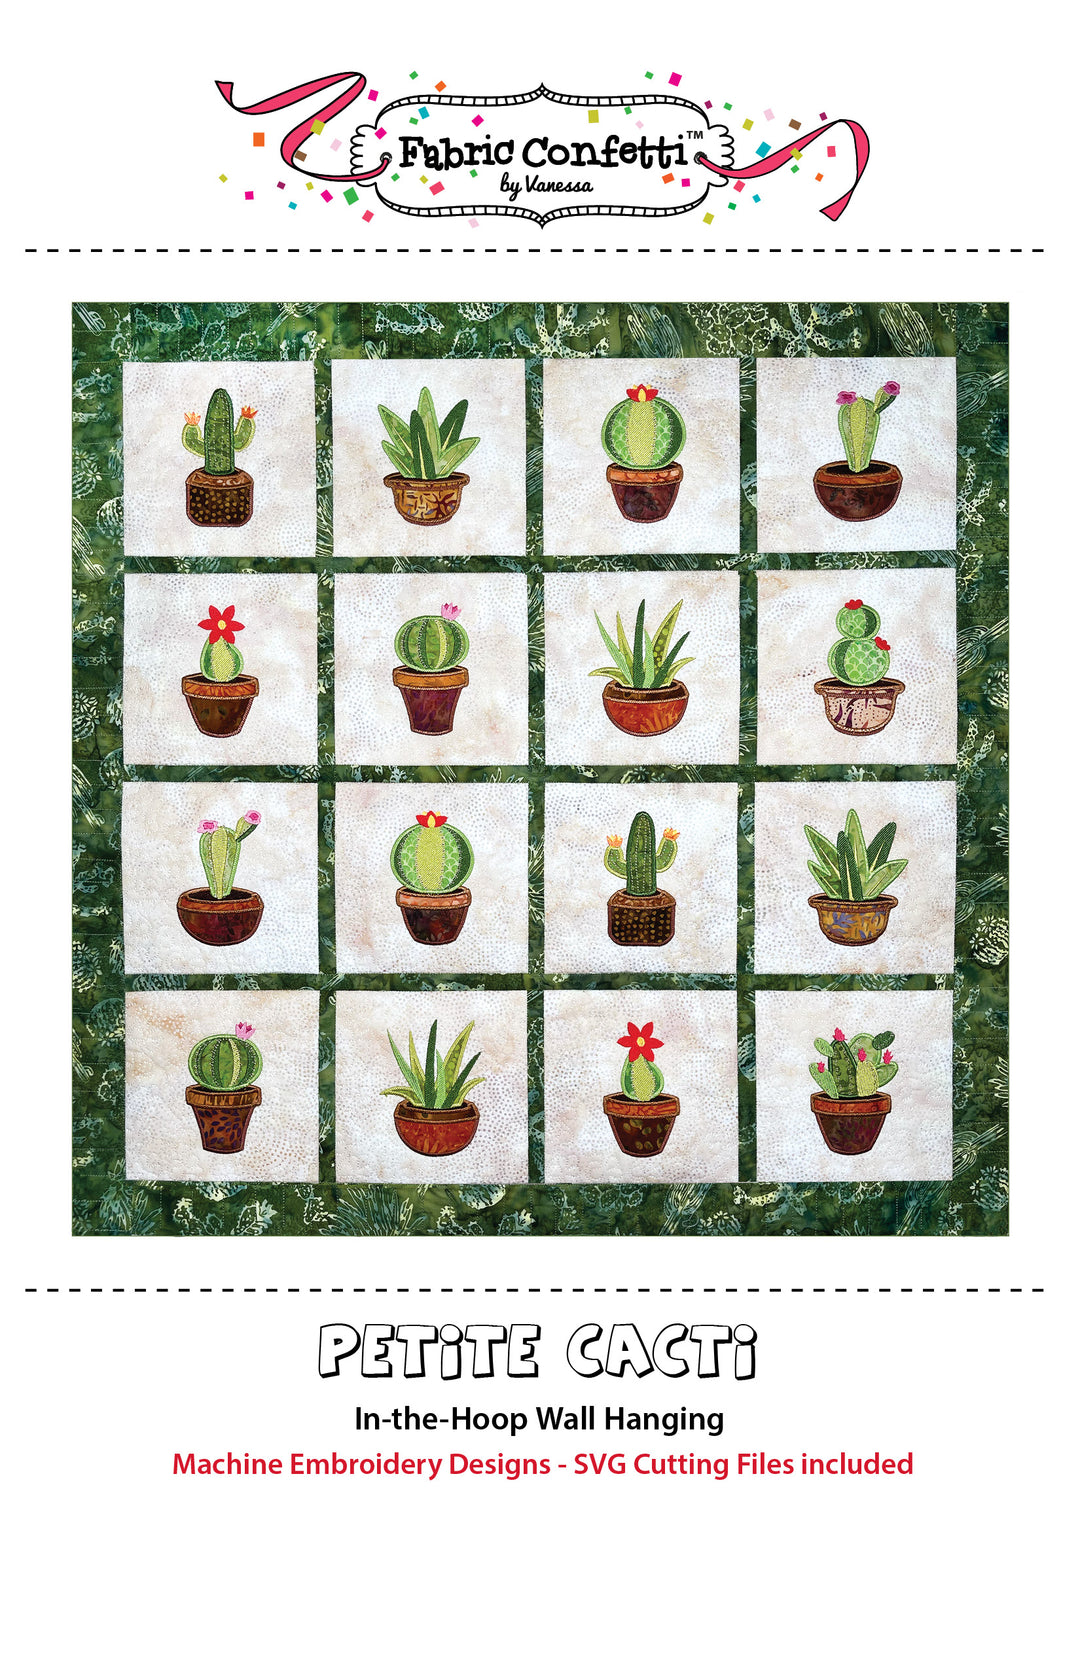 Petite Cacti ITH Wall Hanging for Machine Embroidery